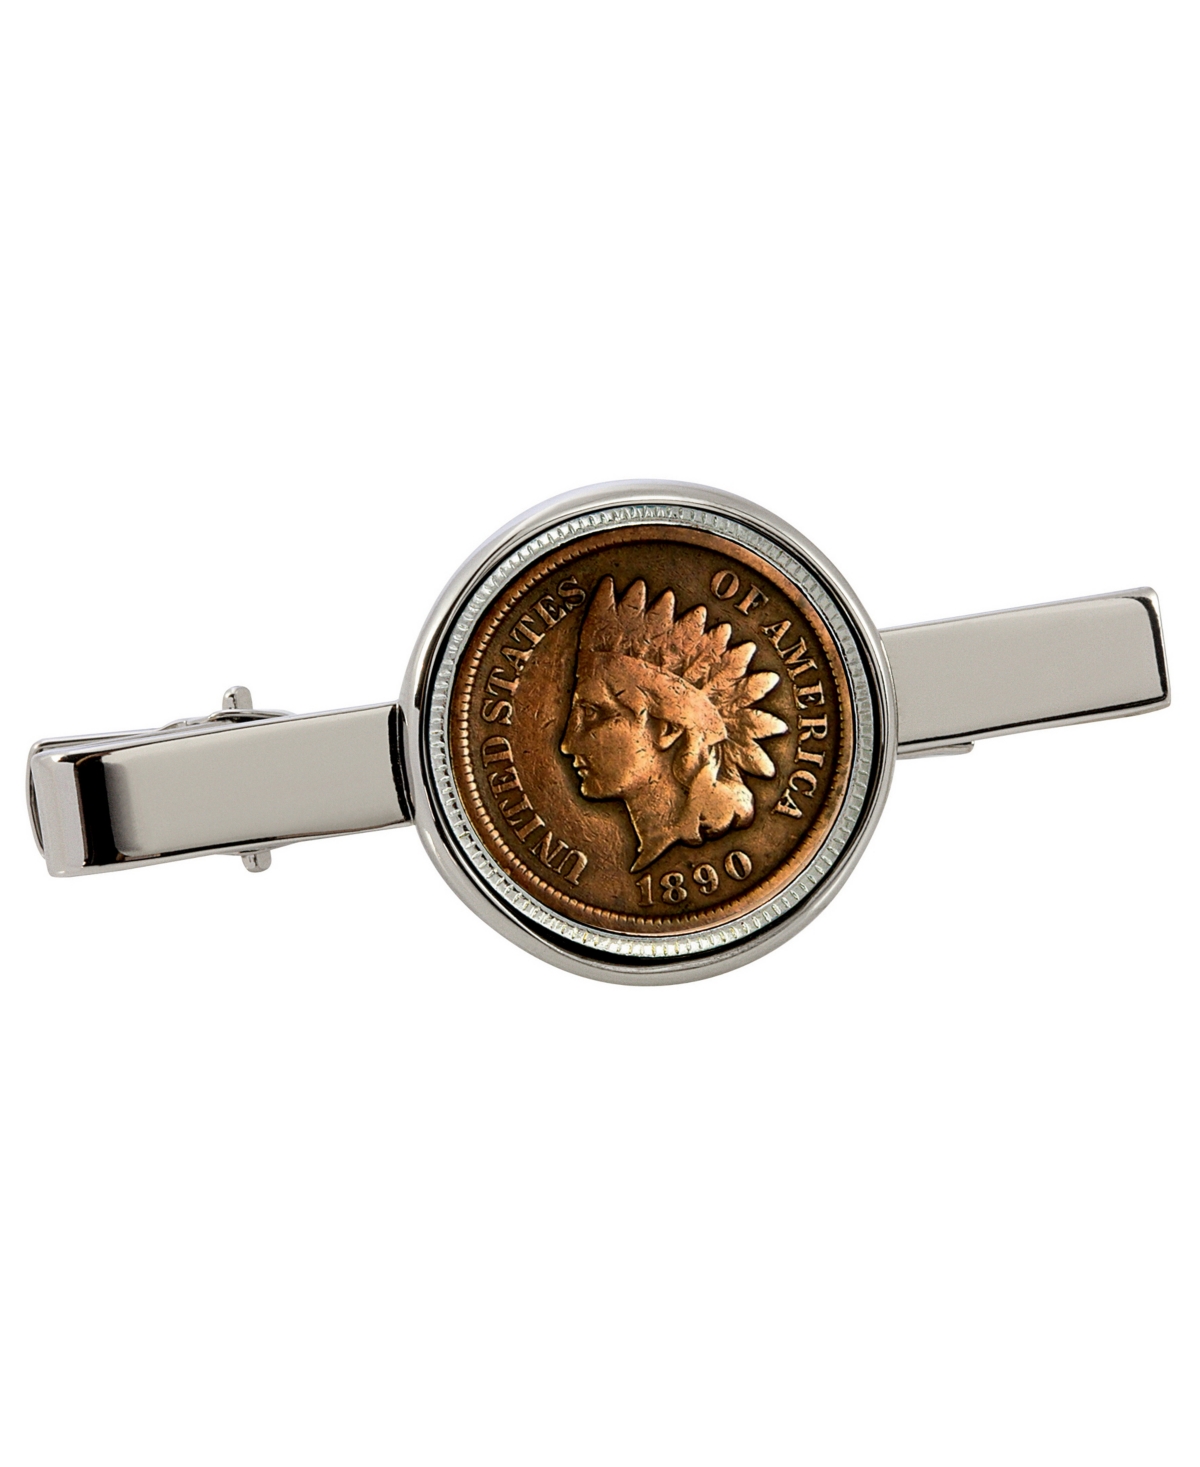 1800's Indian Penny Coin Tie Clip - Silver